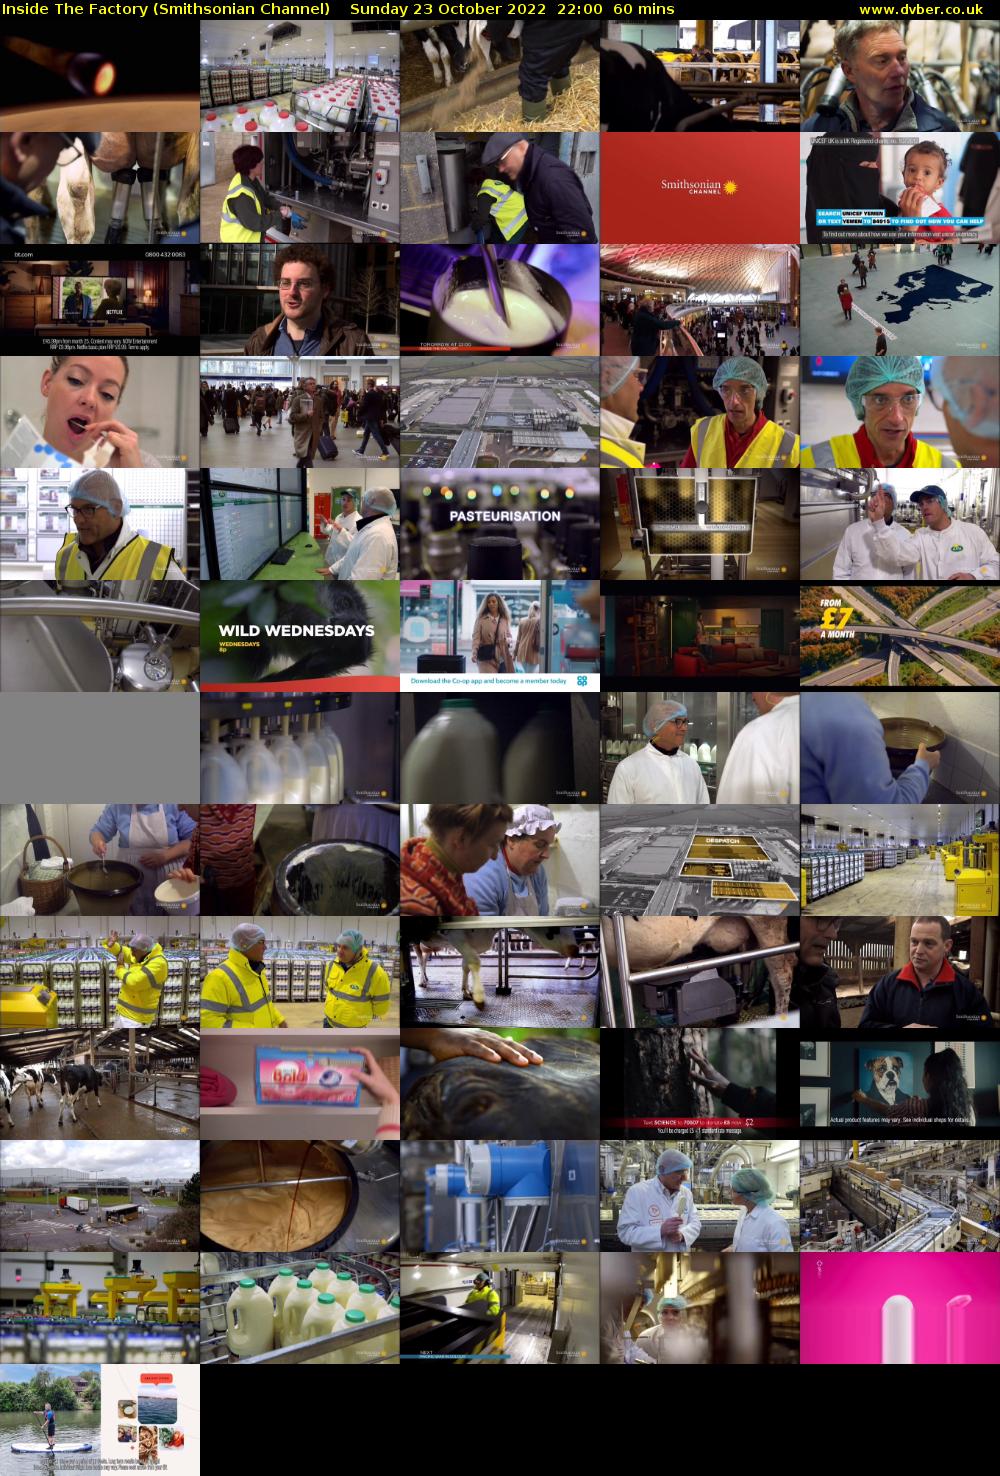 Inside The Factory (Smithsonian Channel) Sunday 23 October 2022 22:00 - 23:00